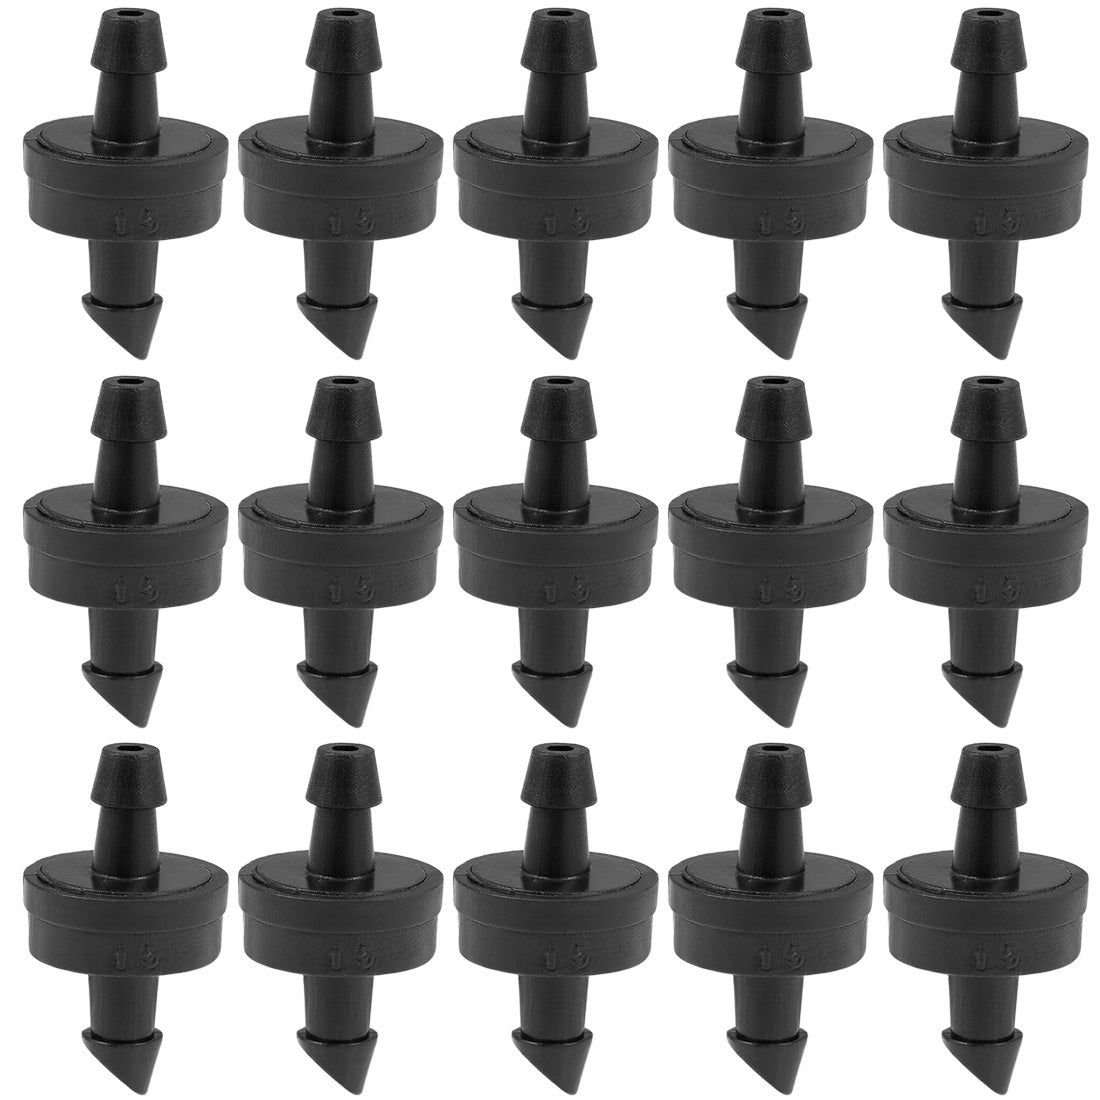 uxcell Uxcell Pressure Compensating Dripper 2.6GPH 10L/H Emitter for Garden Lawn Drip Irrigation with Barbed Hose Connector Plastic Black 25pcs